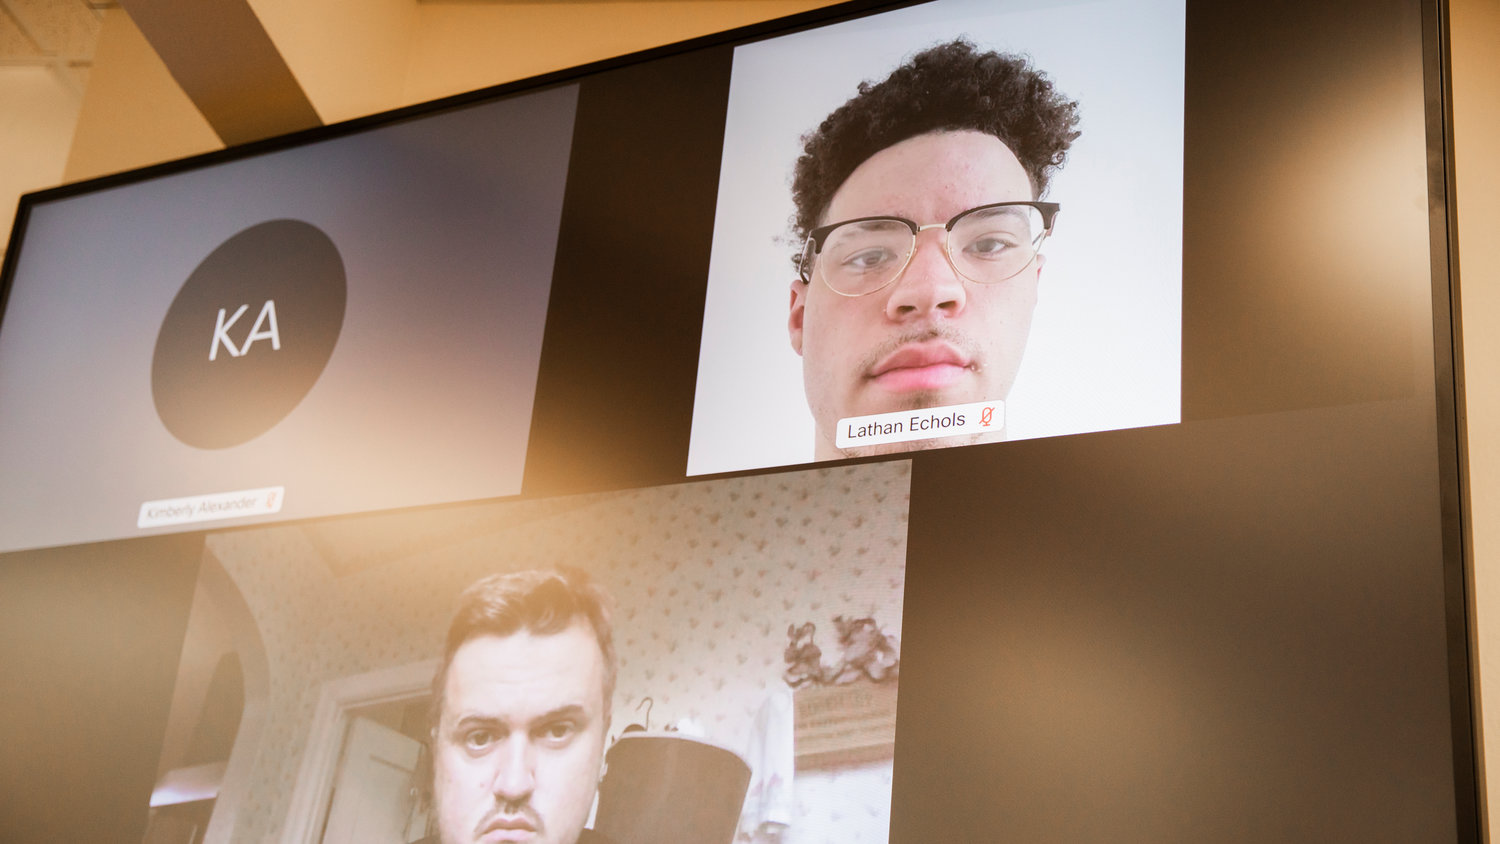 Seattle rapper Lil Mosey, born Lathan Moses Echols, appears in Lewis County Superior Court, via Webex, Friday in Chehalis. Below him on the screen is his defense attorney, Shane O’Rourke.